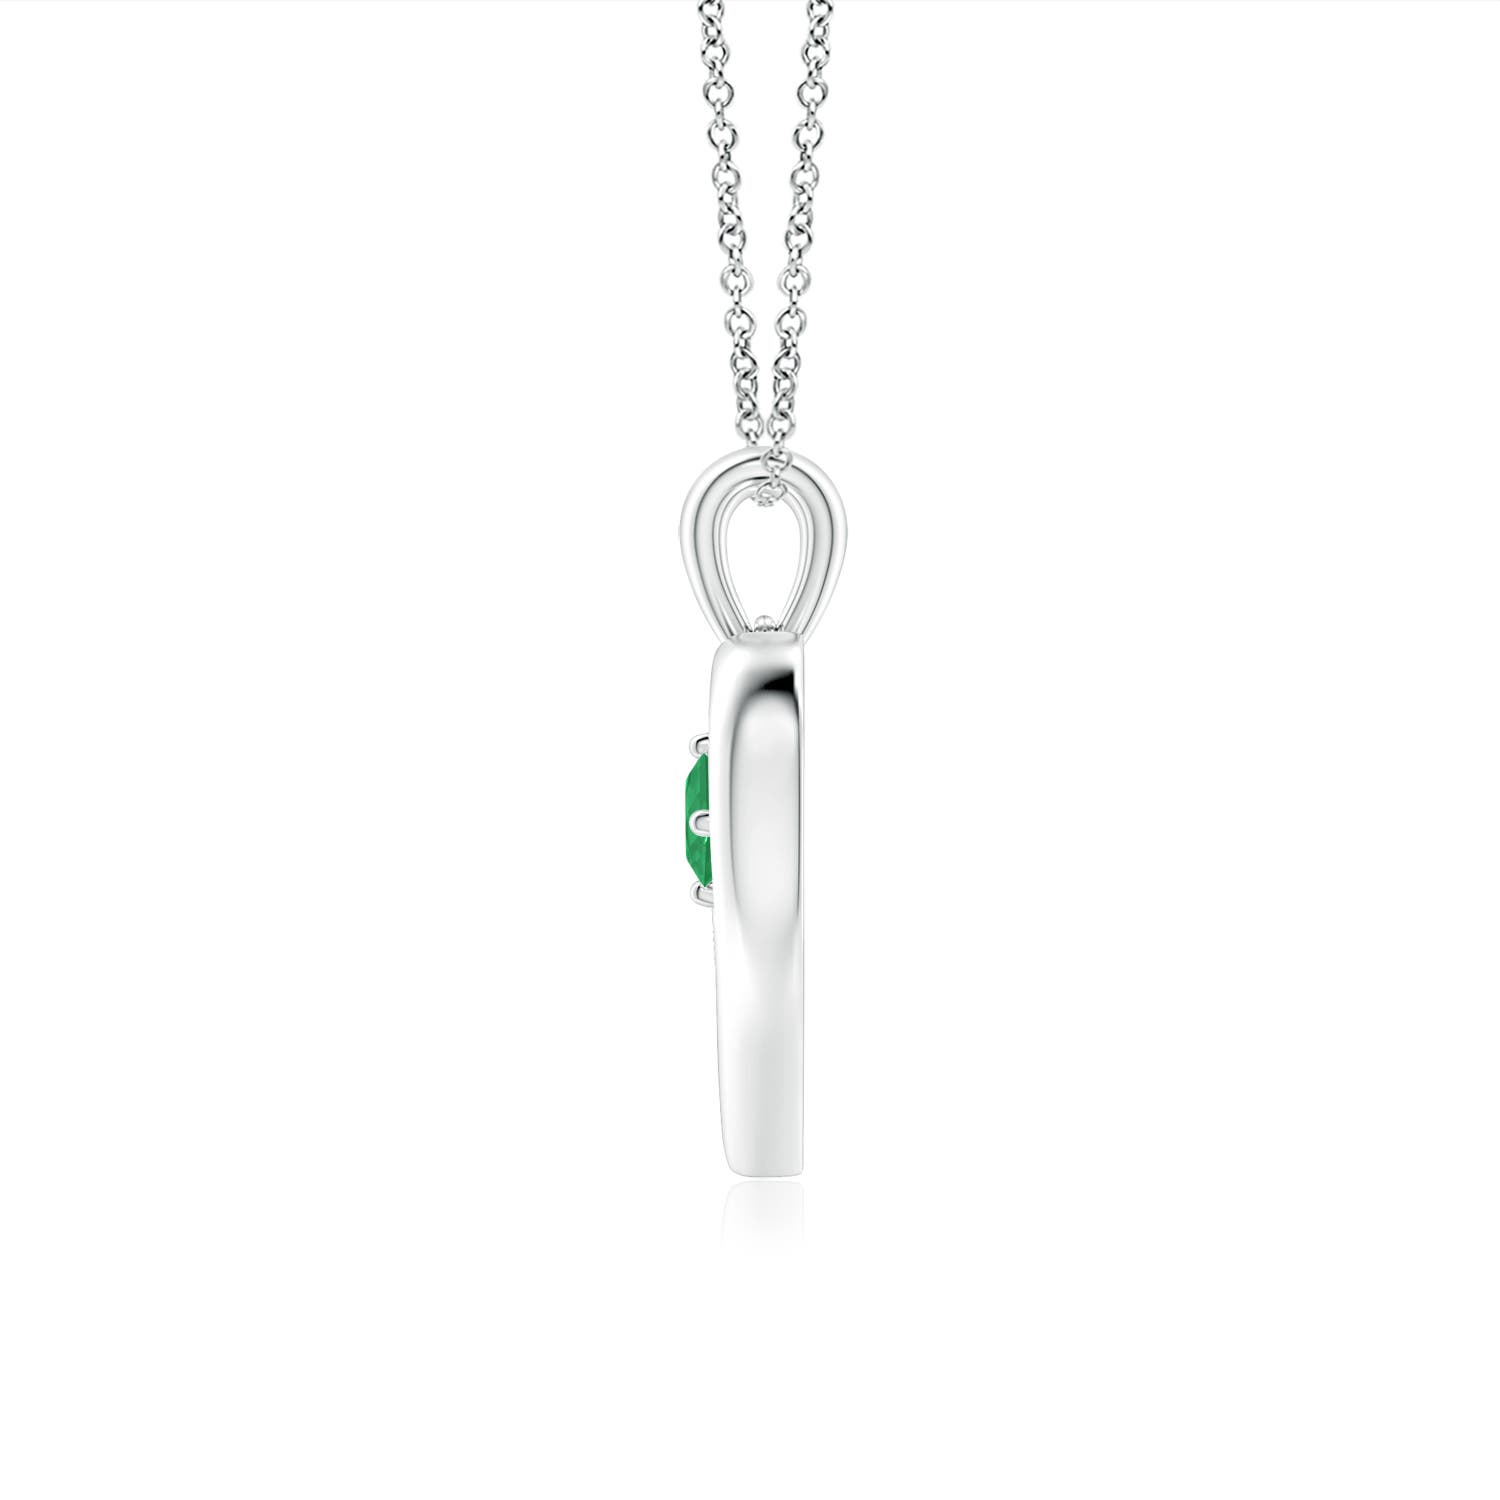 A - Emerald / 0.1 CT / 14 KT White Gold